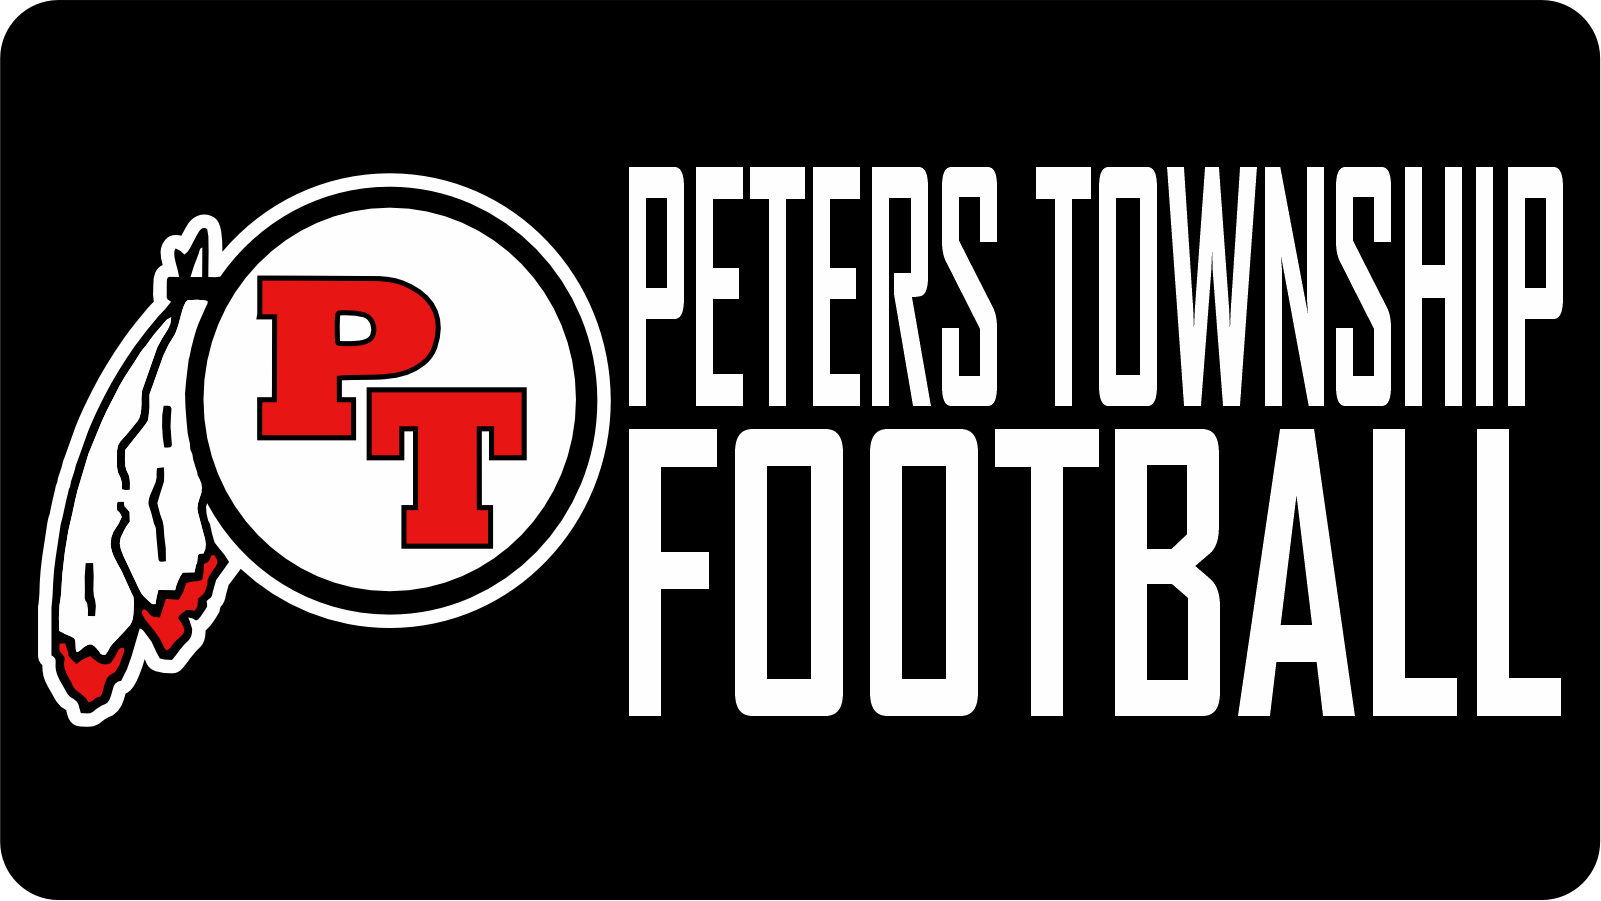 Peters Township Football